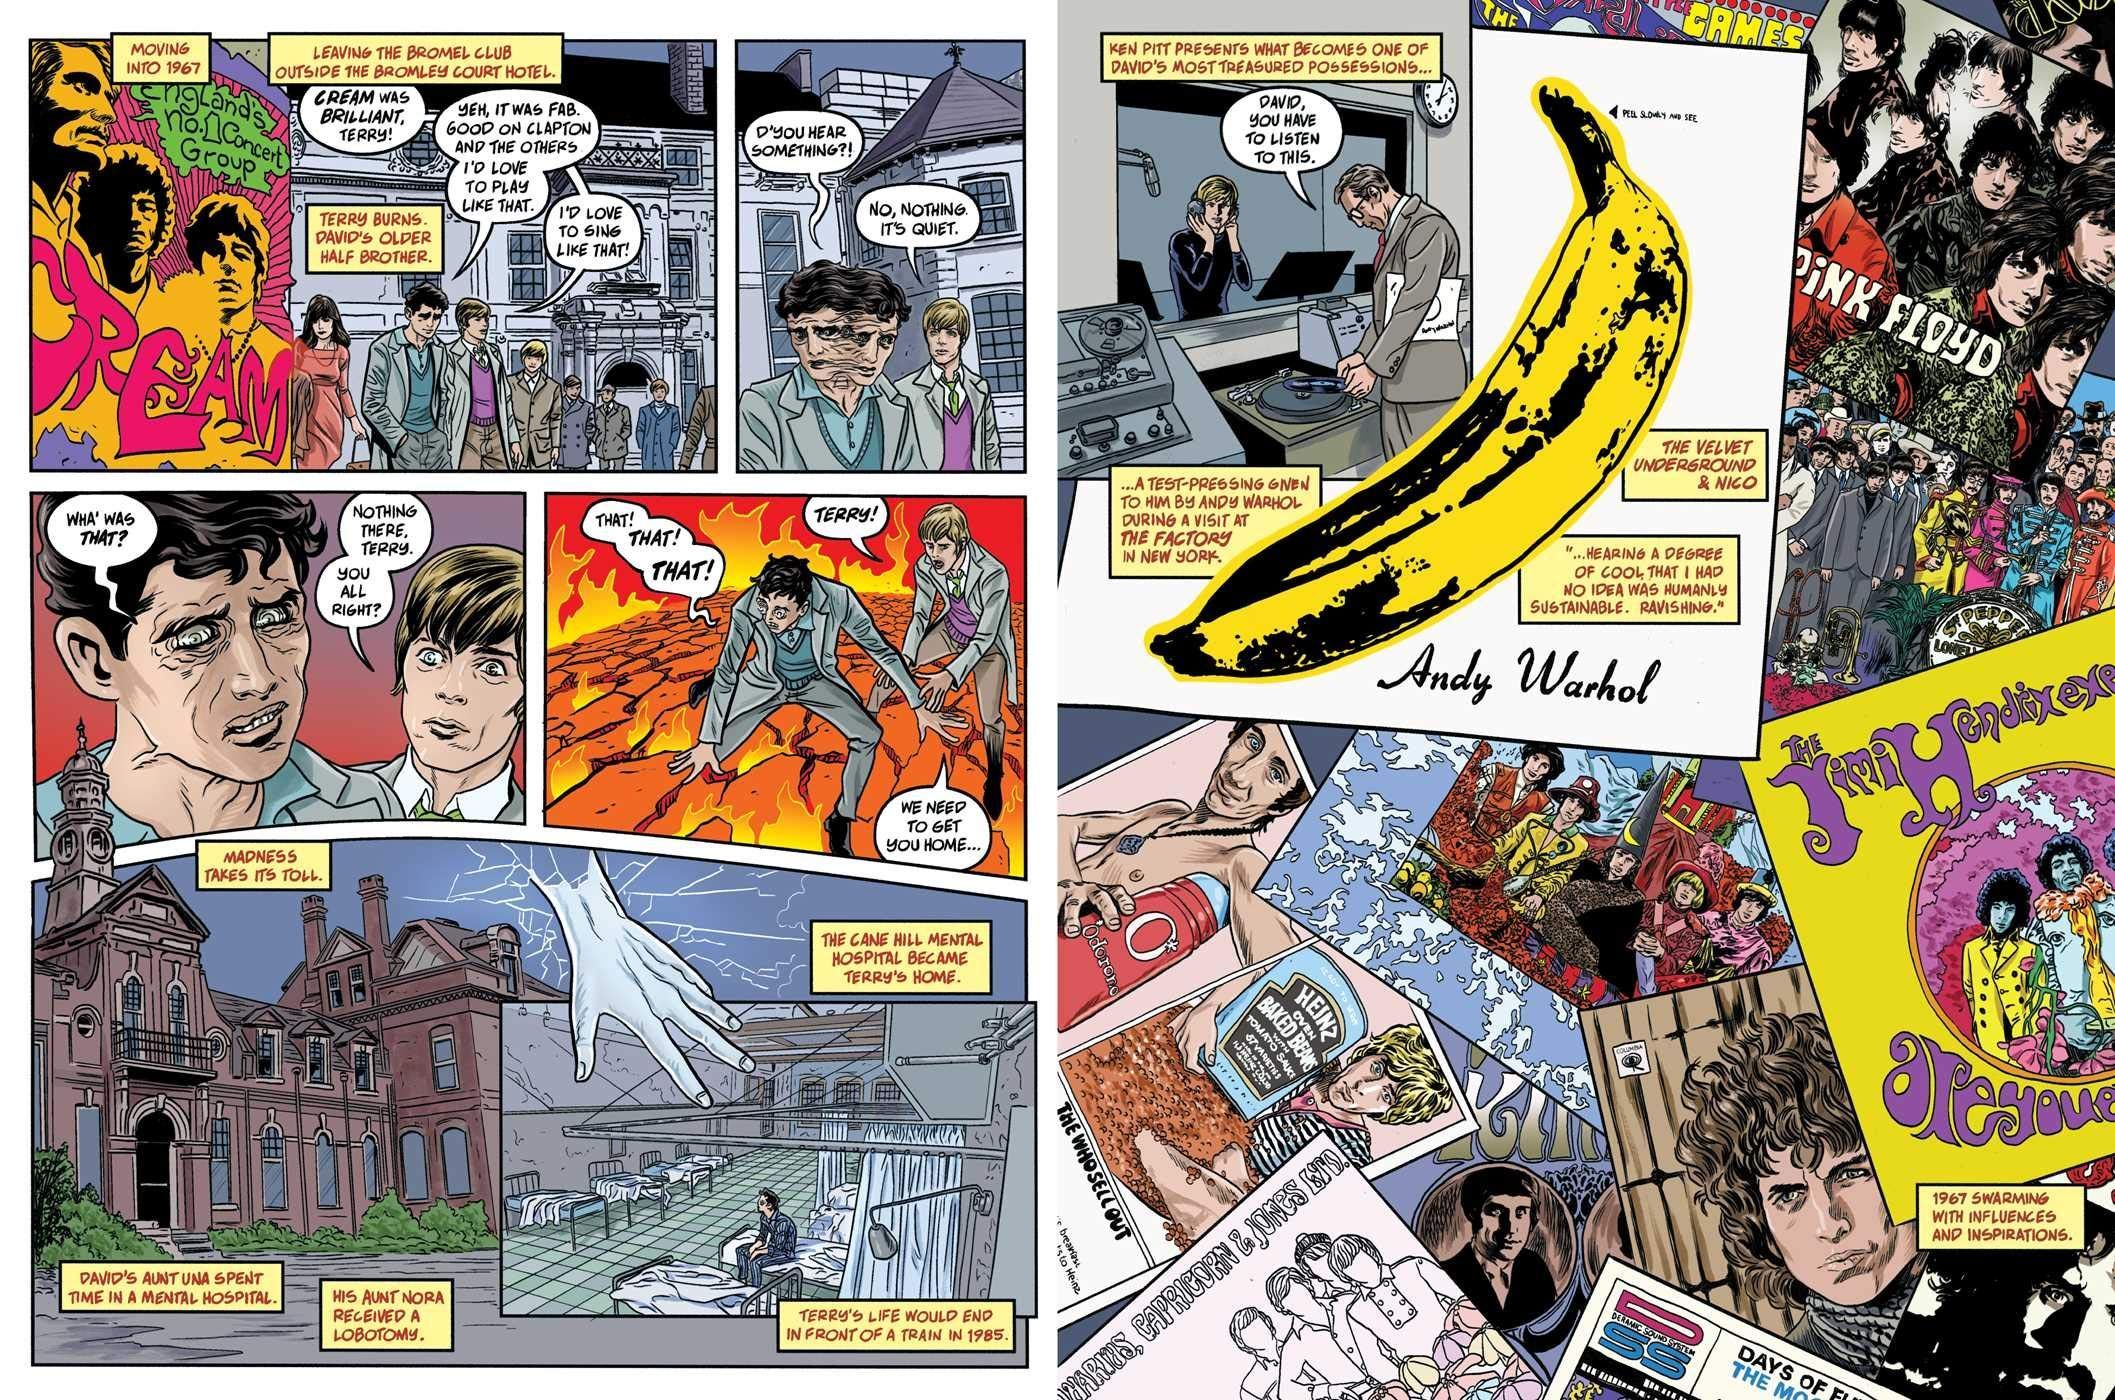 Bob Dylan referenced in a graphic novel about David Bowie